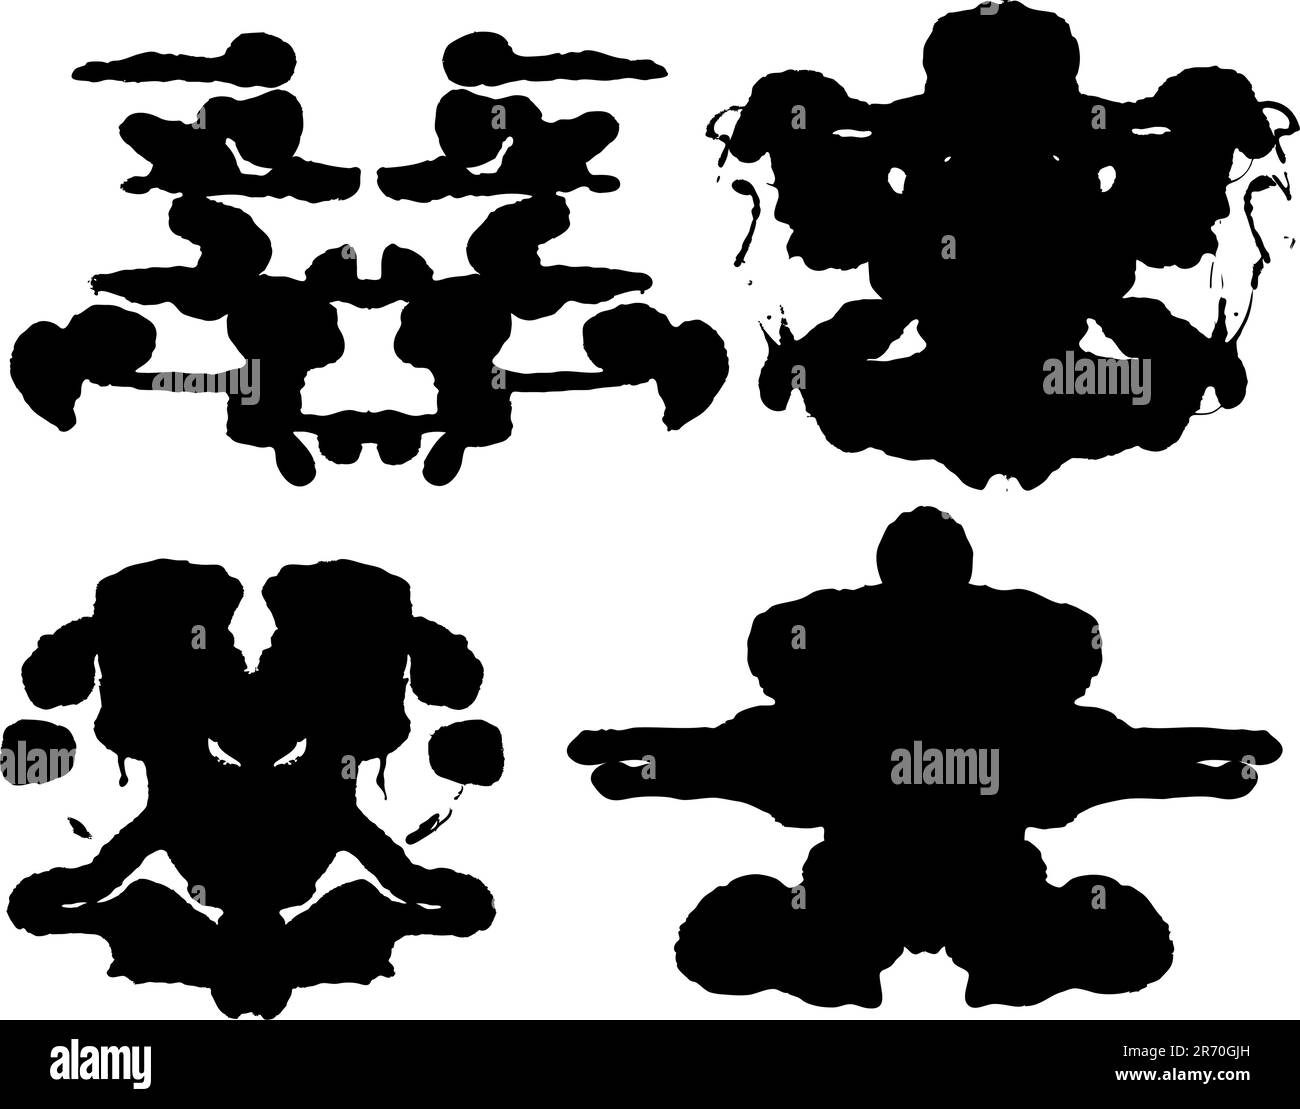 An abstract image of inkblots. Stock Vector